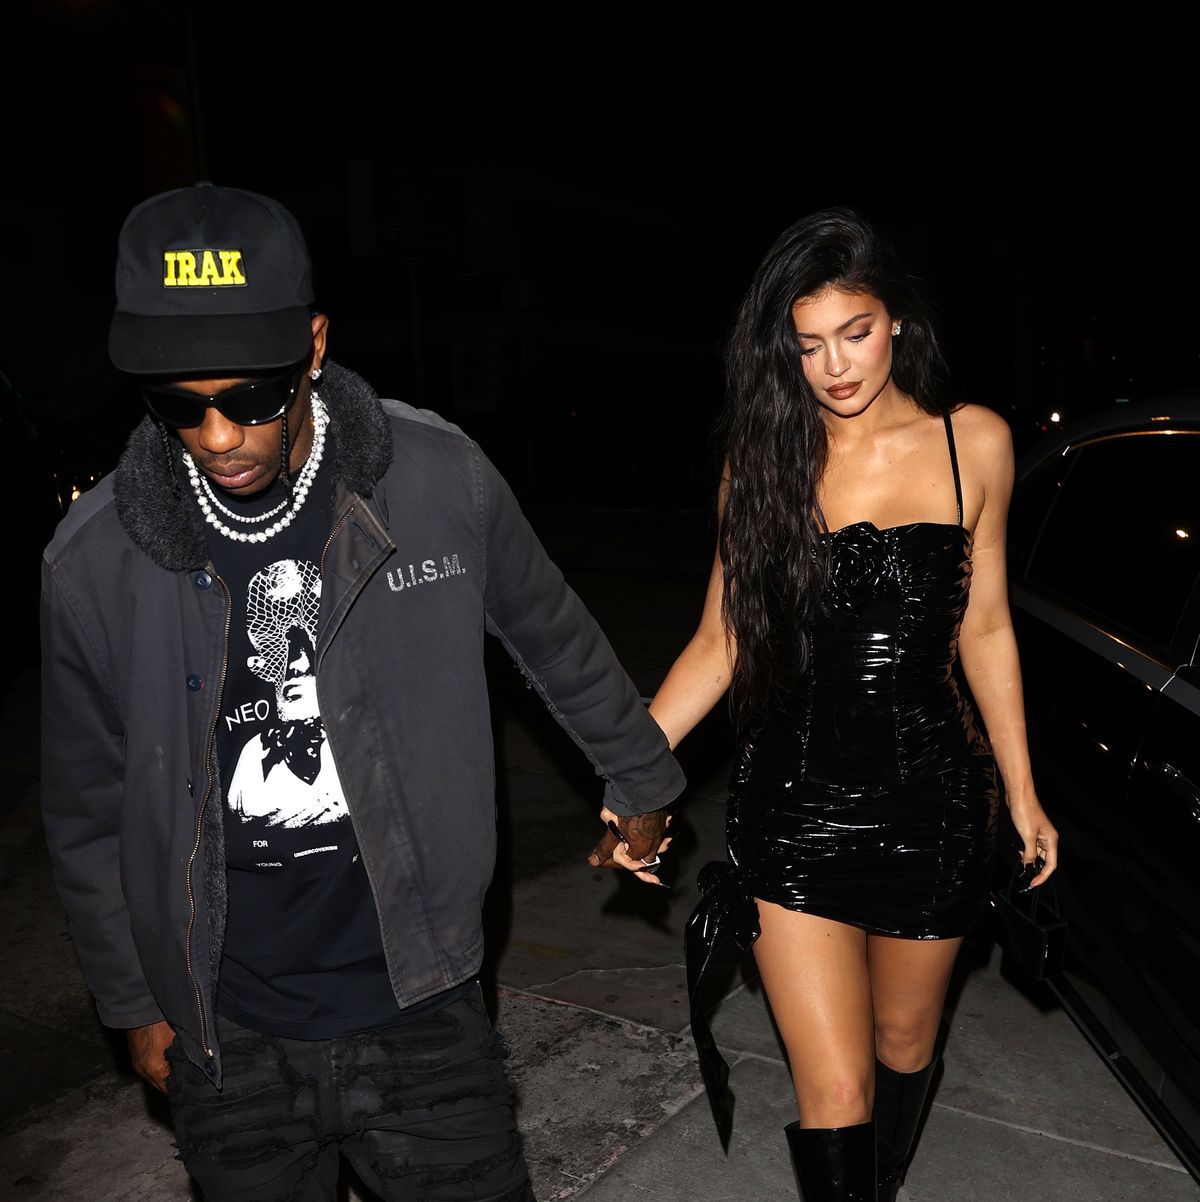 Kylie Jenner Dresses Up in Leather & Boots for Dinner With Lori